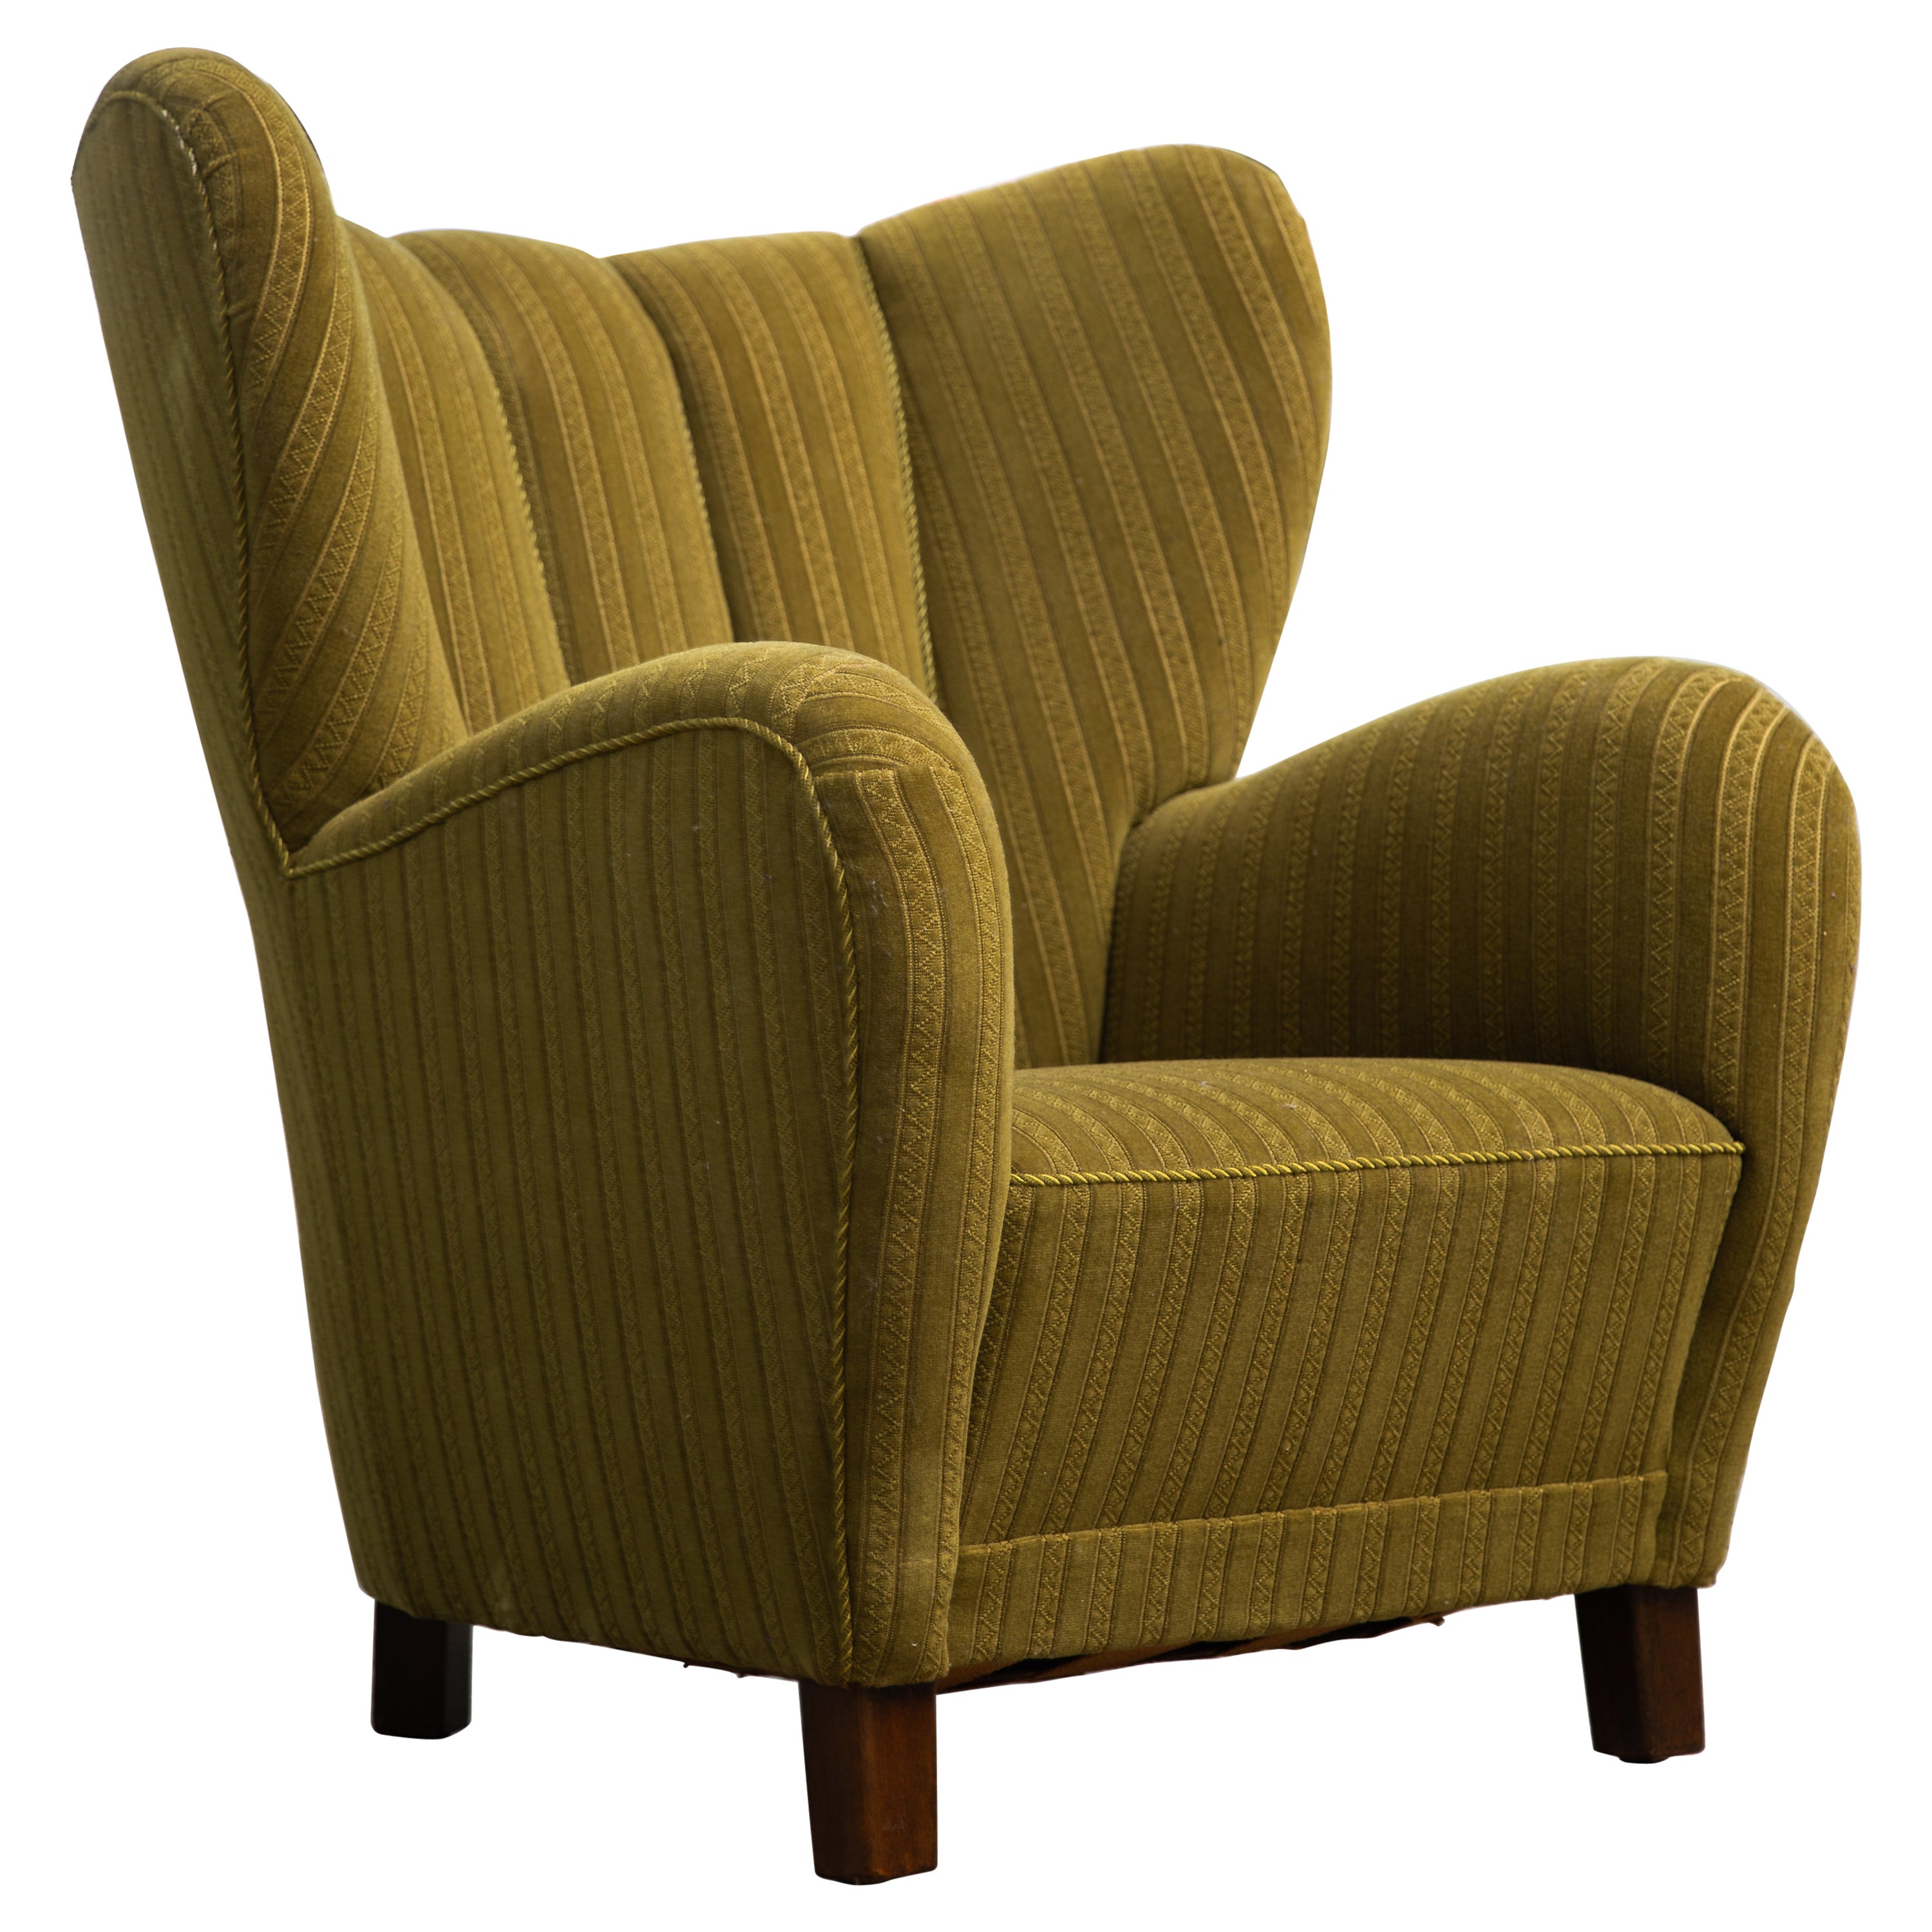 Mogens Lassen Style Danish 1940s Lounge or Club Chair in Green Mohair Fabric